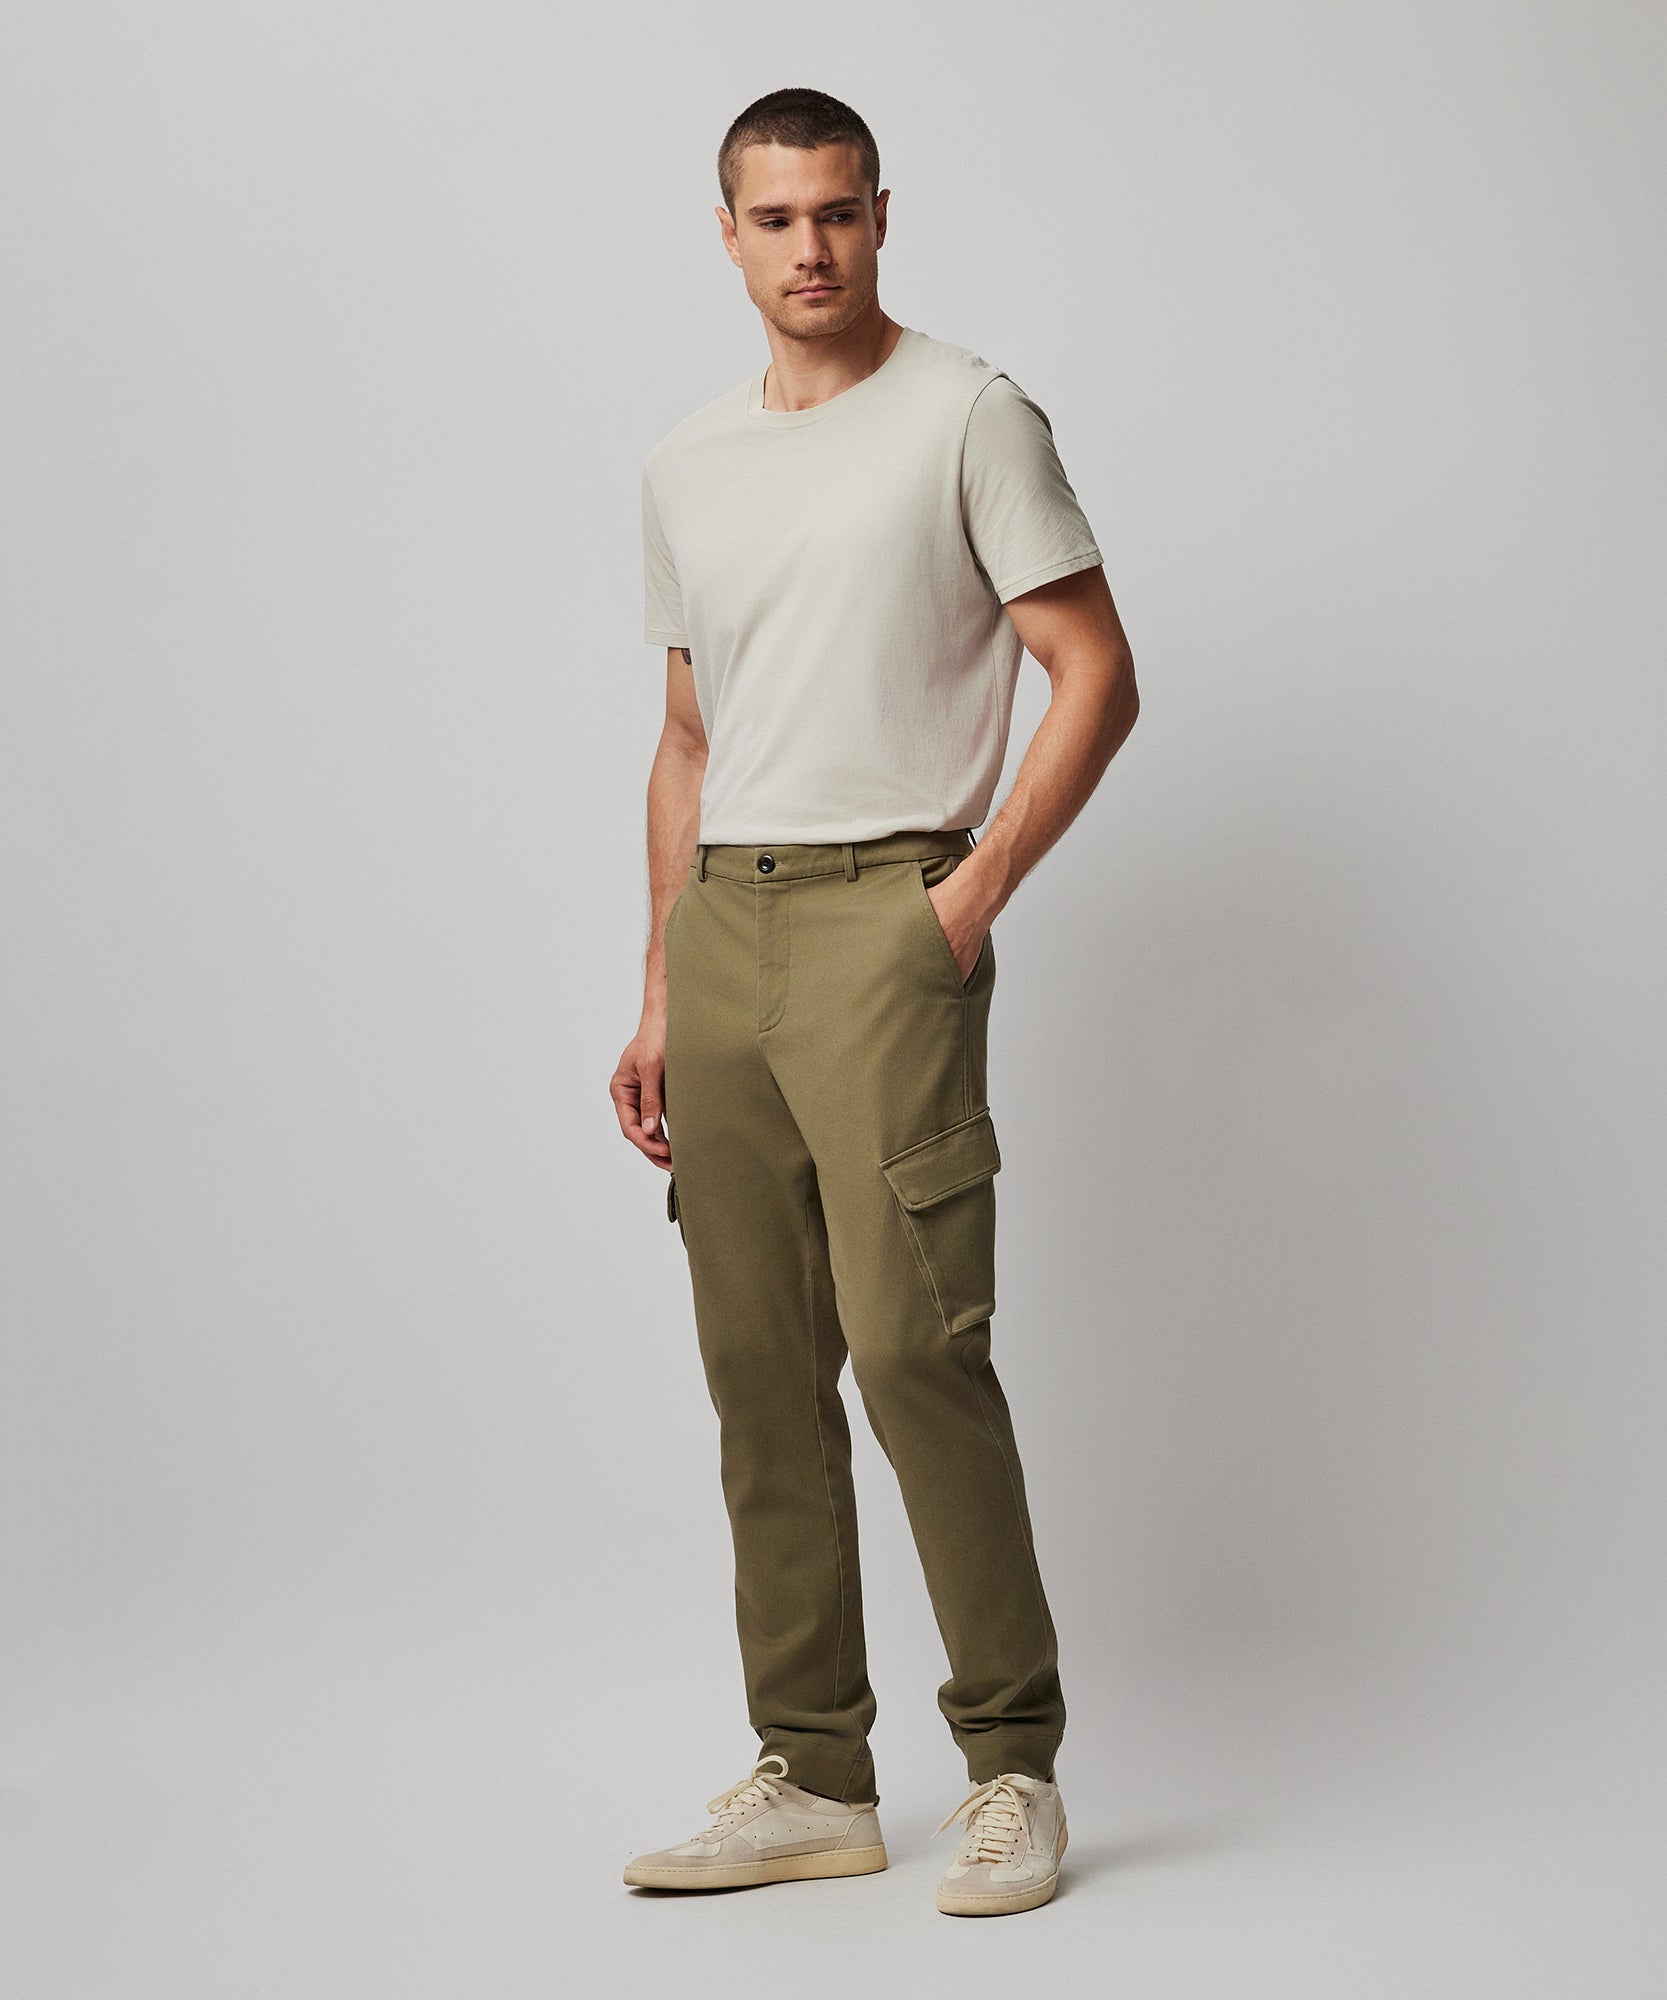 Cargo Trousers for Men,Solid Casual Slim Fit Slacks Straight Leg Zipper Fly  Pants Midweight Basic Work Trousers,Sweatpants Tactical Pants Compression  Hiking Pants for Men(Khaki,5X-Large) at Amazon Men's Clothing store